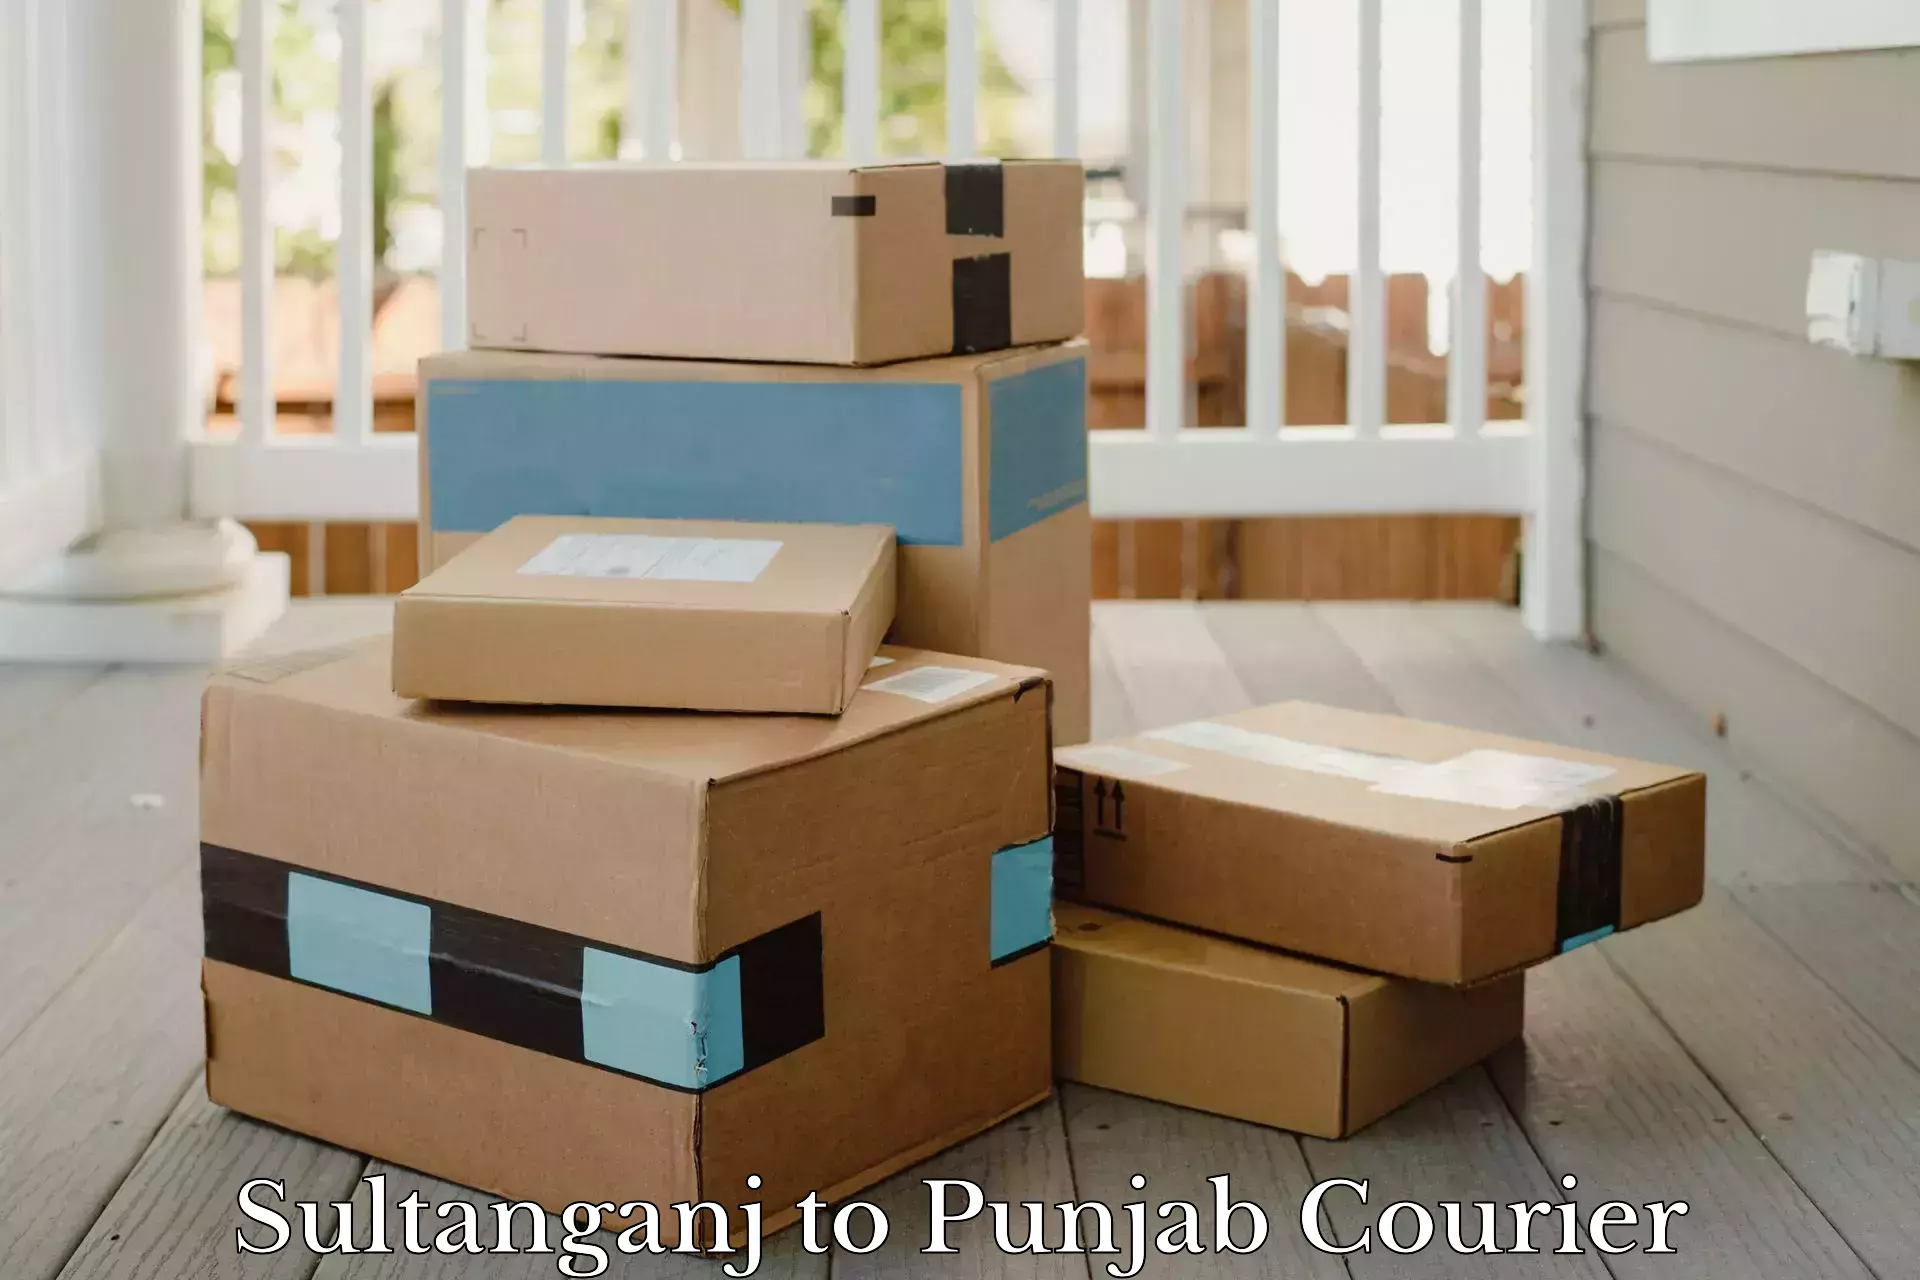 Efficient package consolidation Sultanganj to Mohali